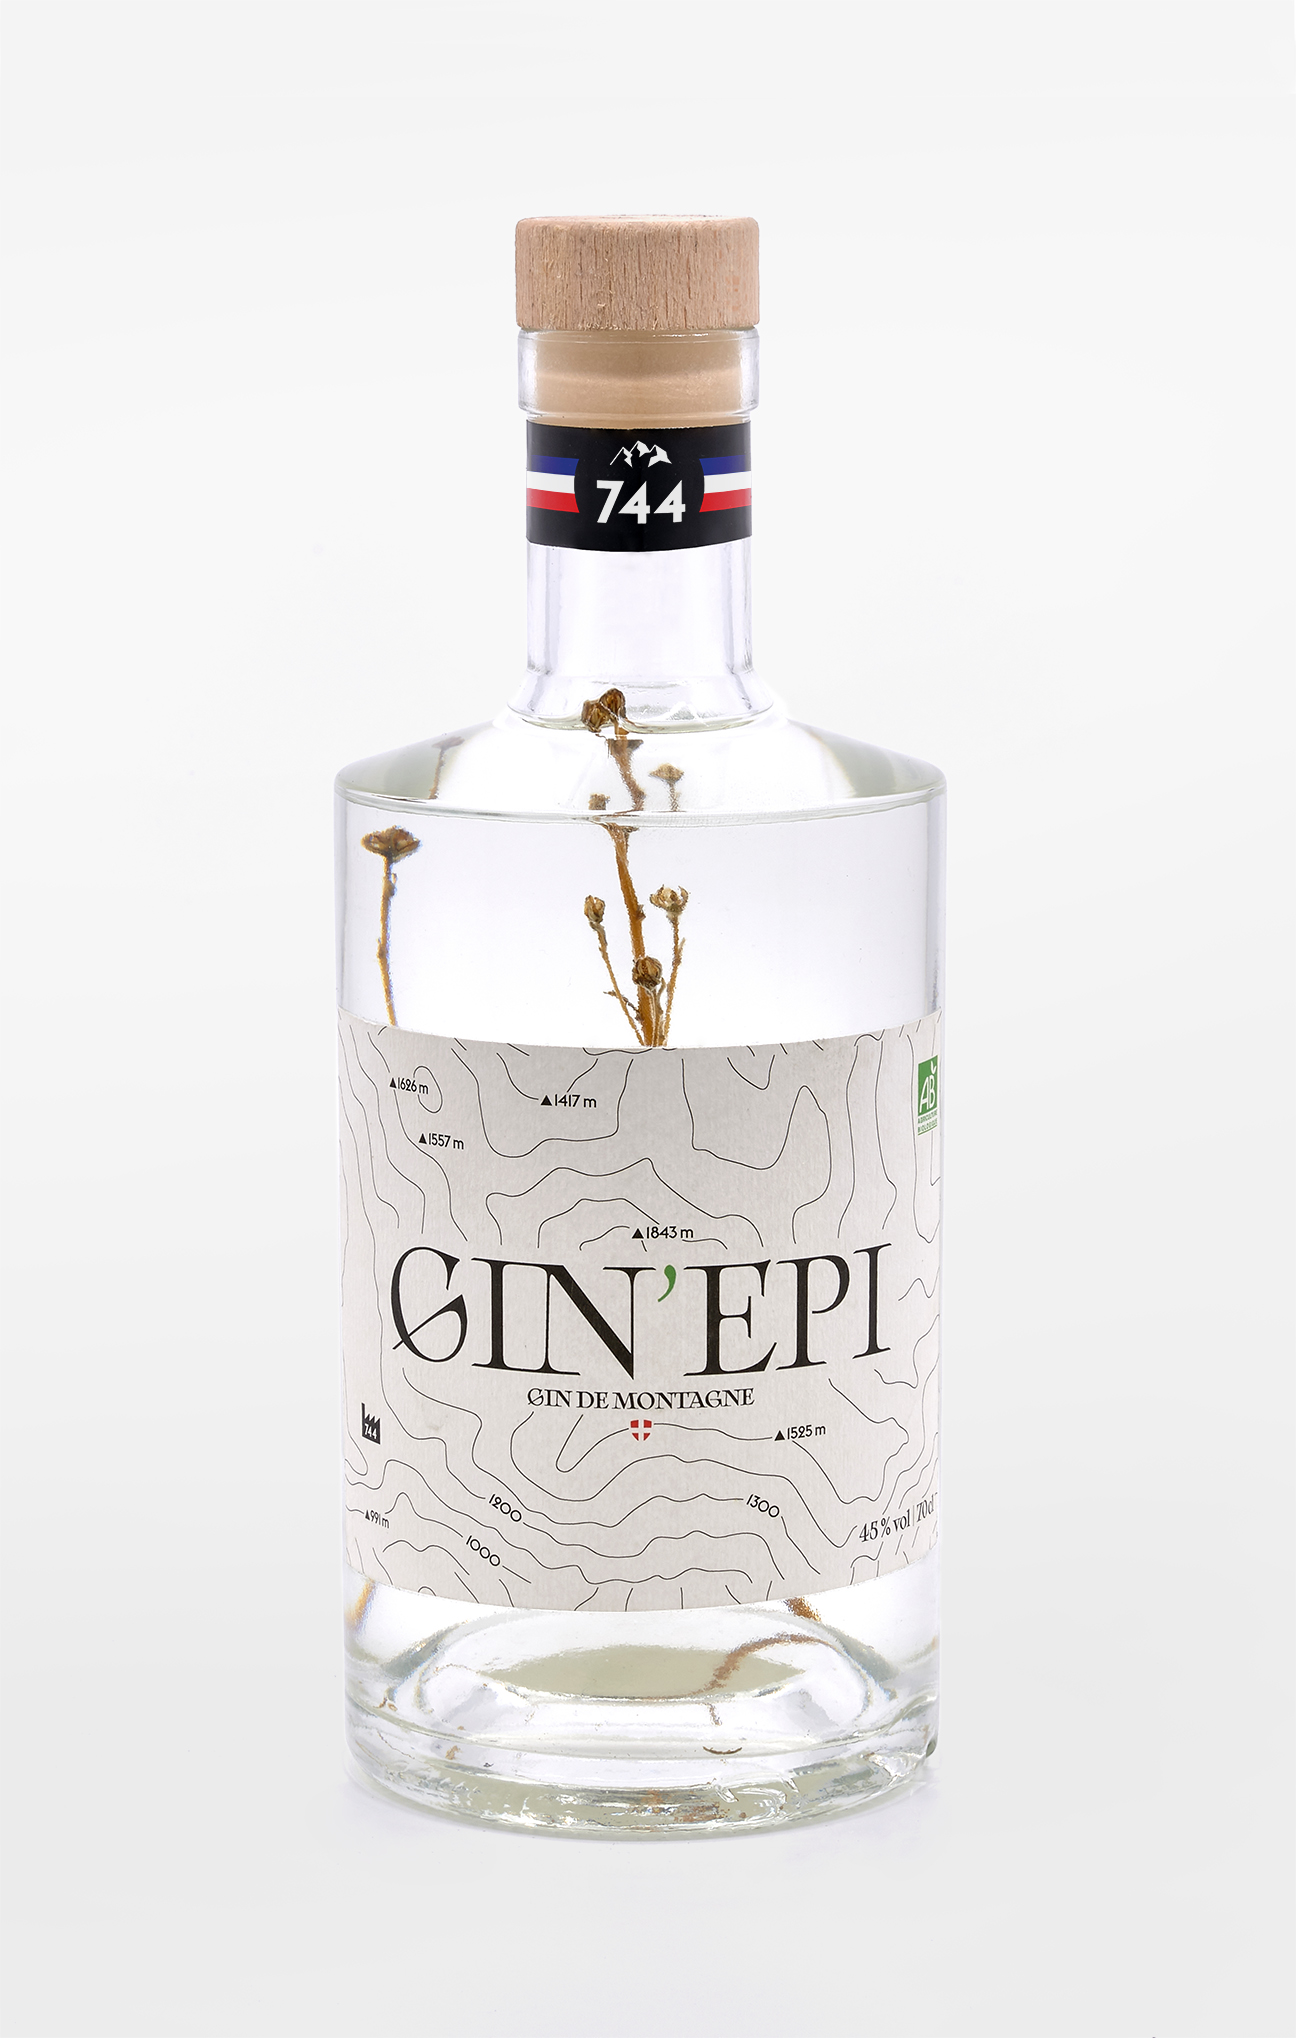 Fabiencuffel_Typographiste_Graphisme_Geneve_Graphiste_Packaging_Brasserie744_Ginepi